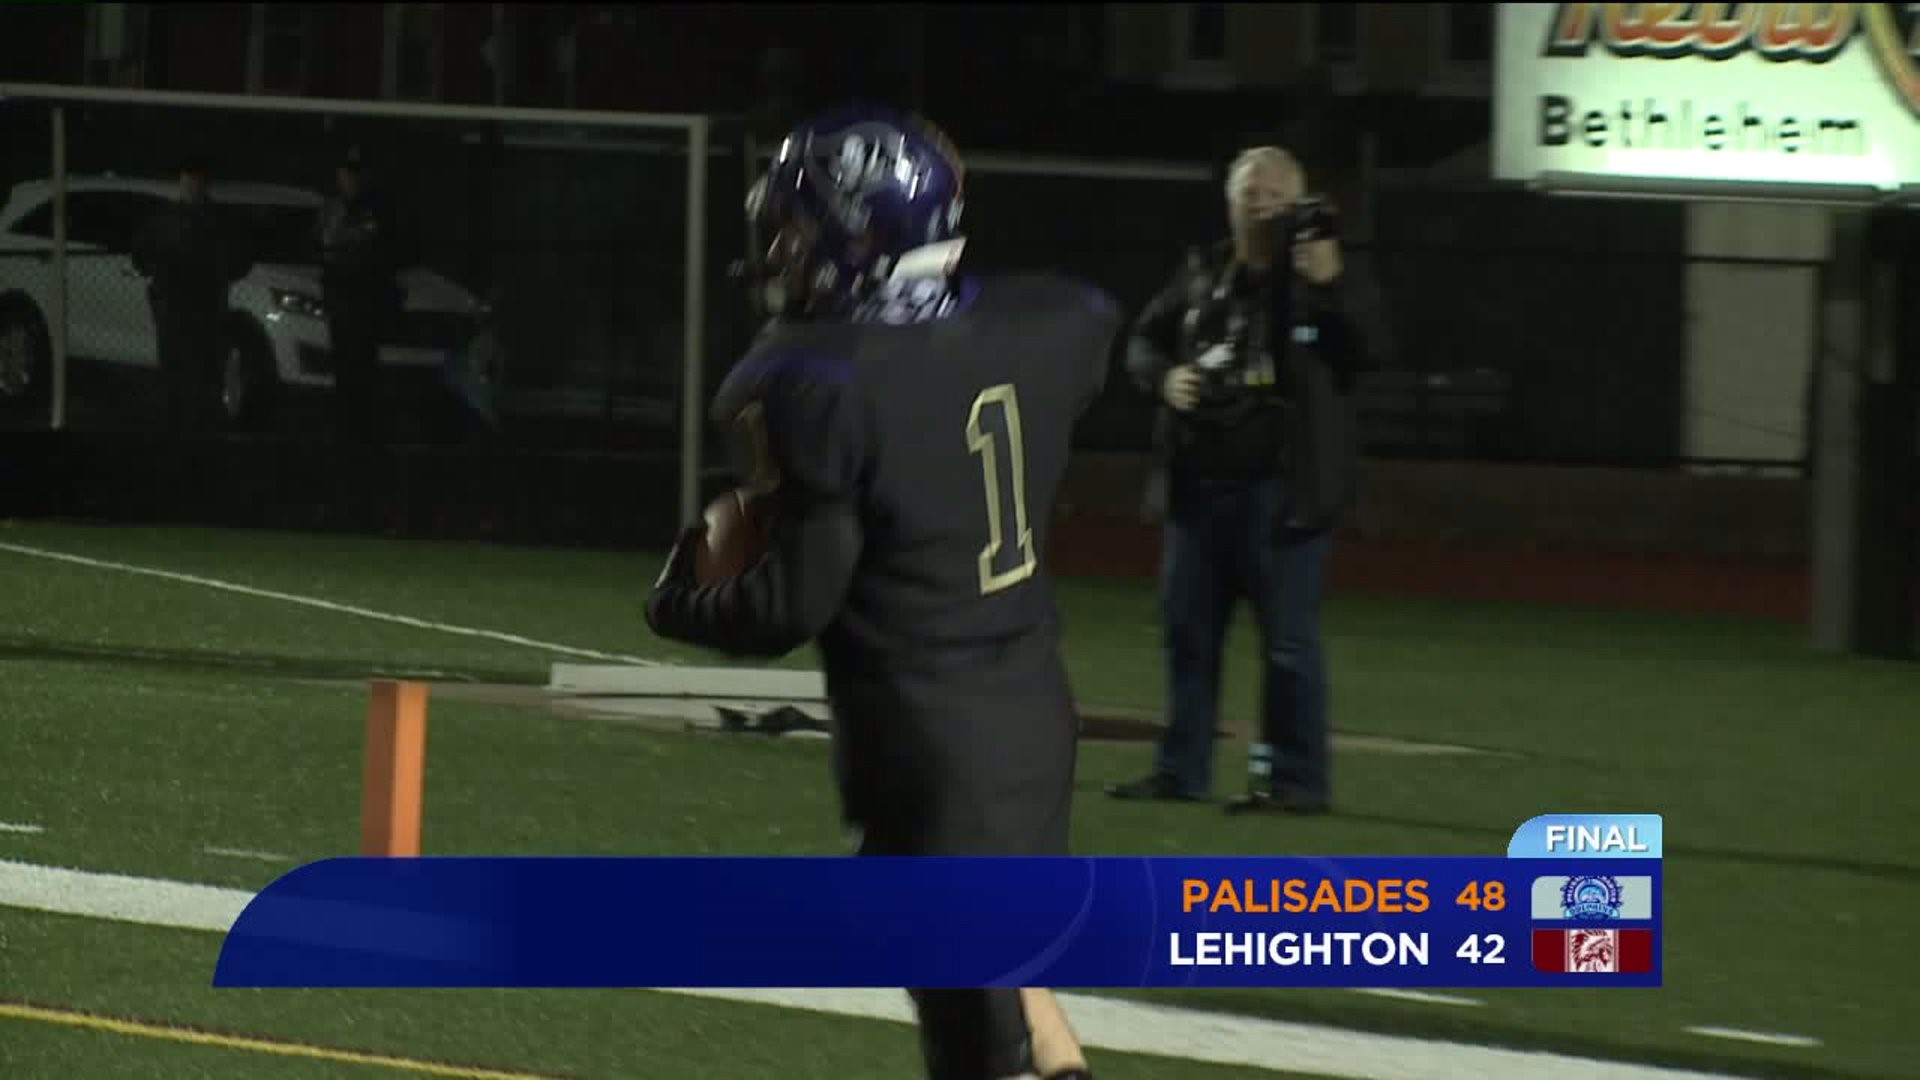 Lehighton Falls Comes Up Short Against Palisades, 48-42 in District Title